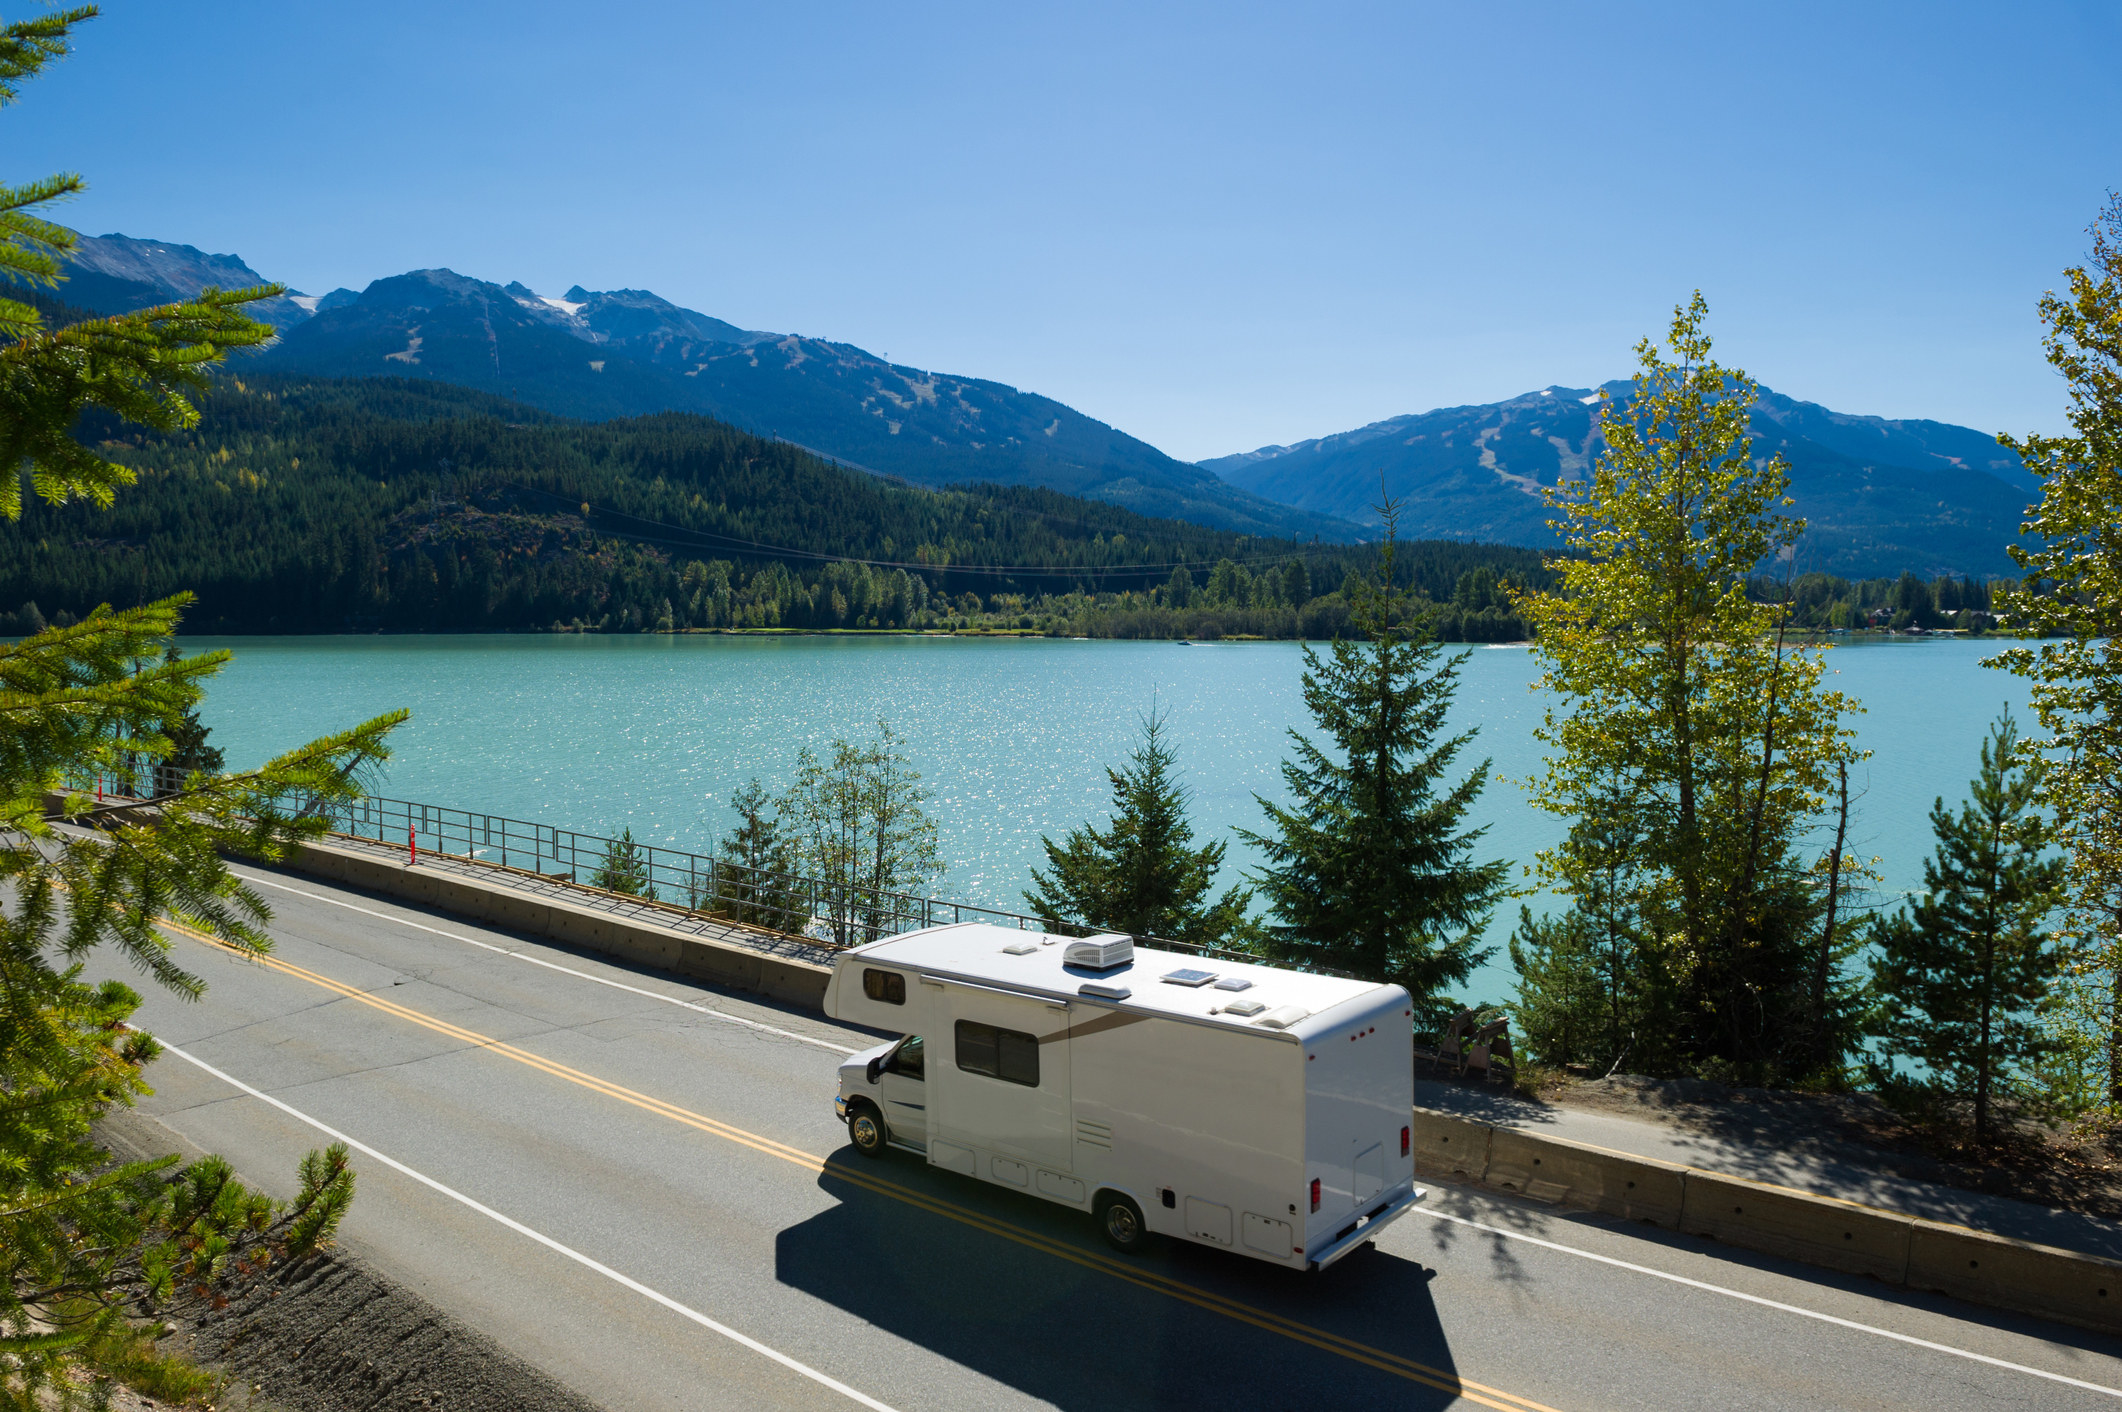 An RV driving on a road beside a lake.